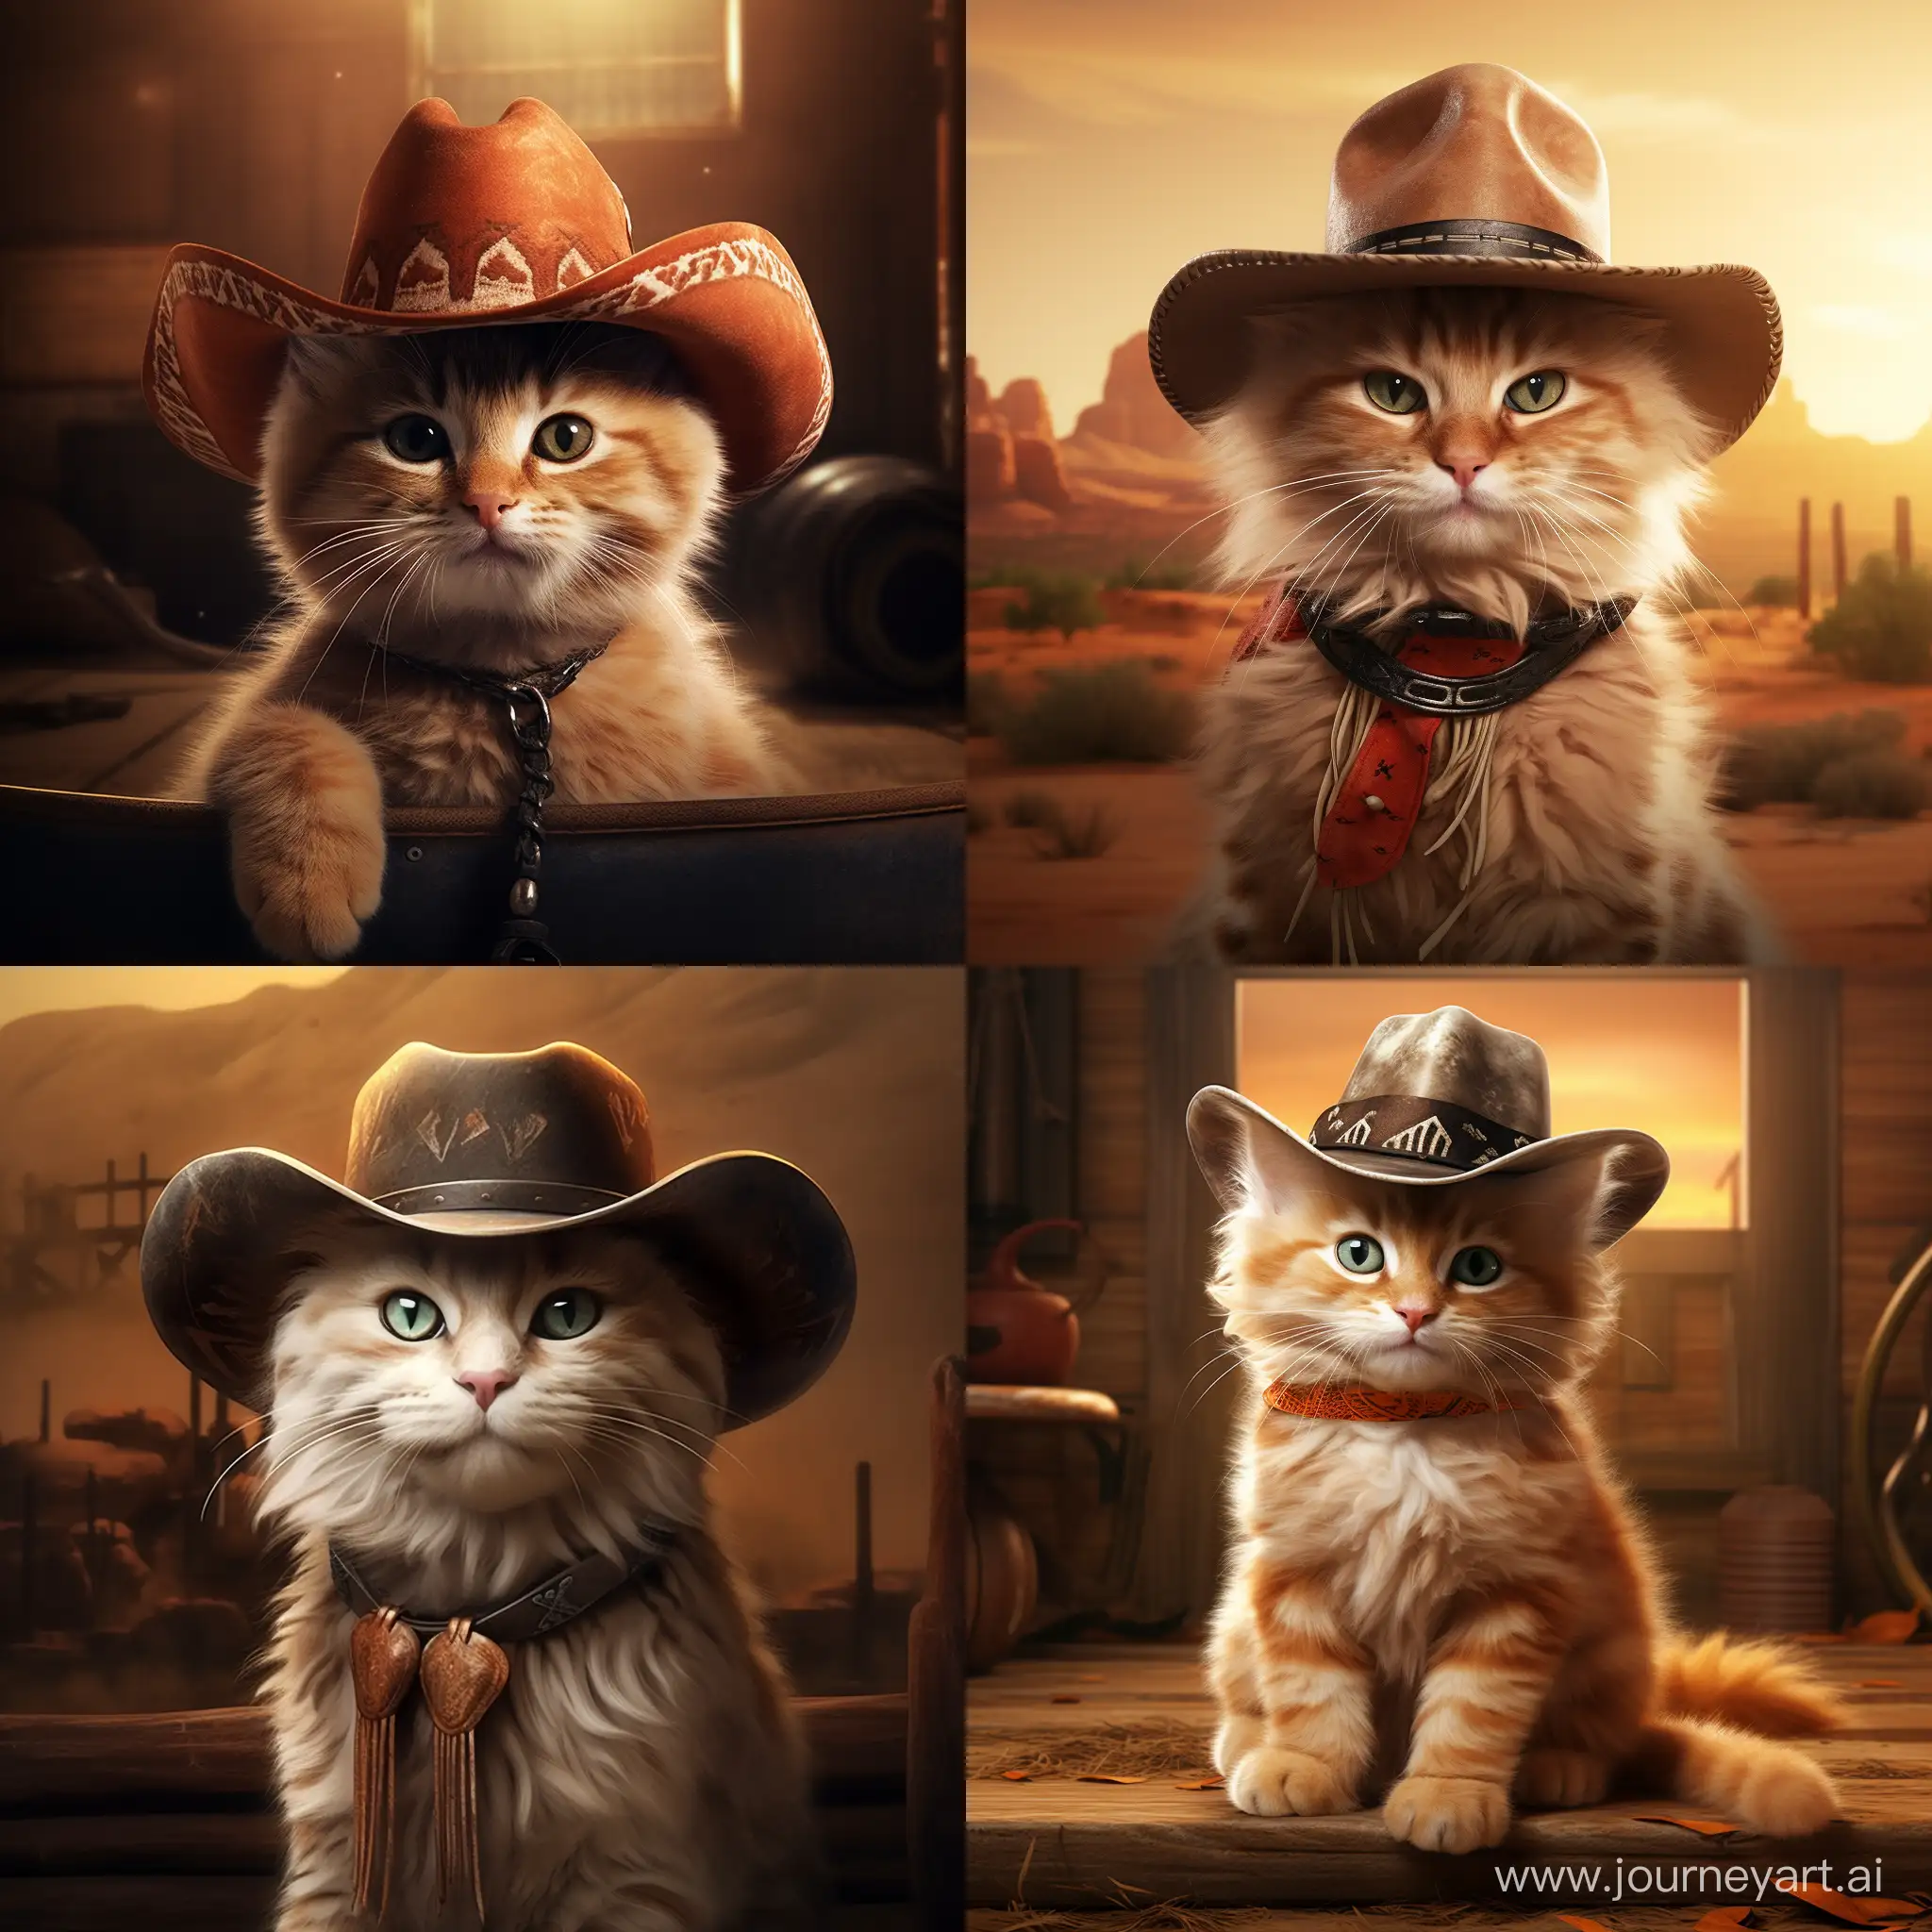 Create a cat with a cowboy hat